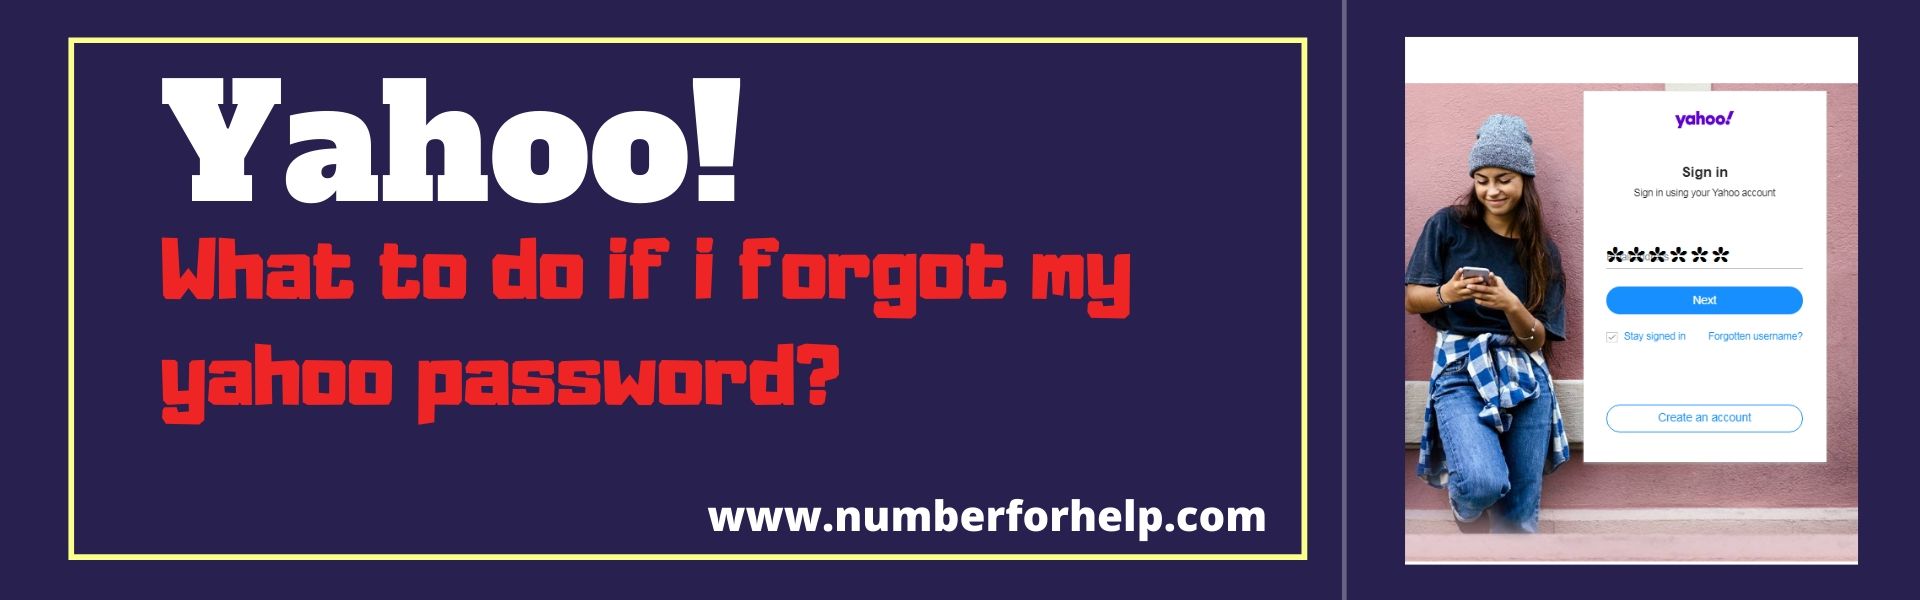 2020-01-23-01-20-31What to do if I forgot my Yahoo password